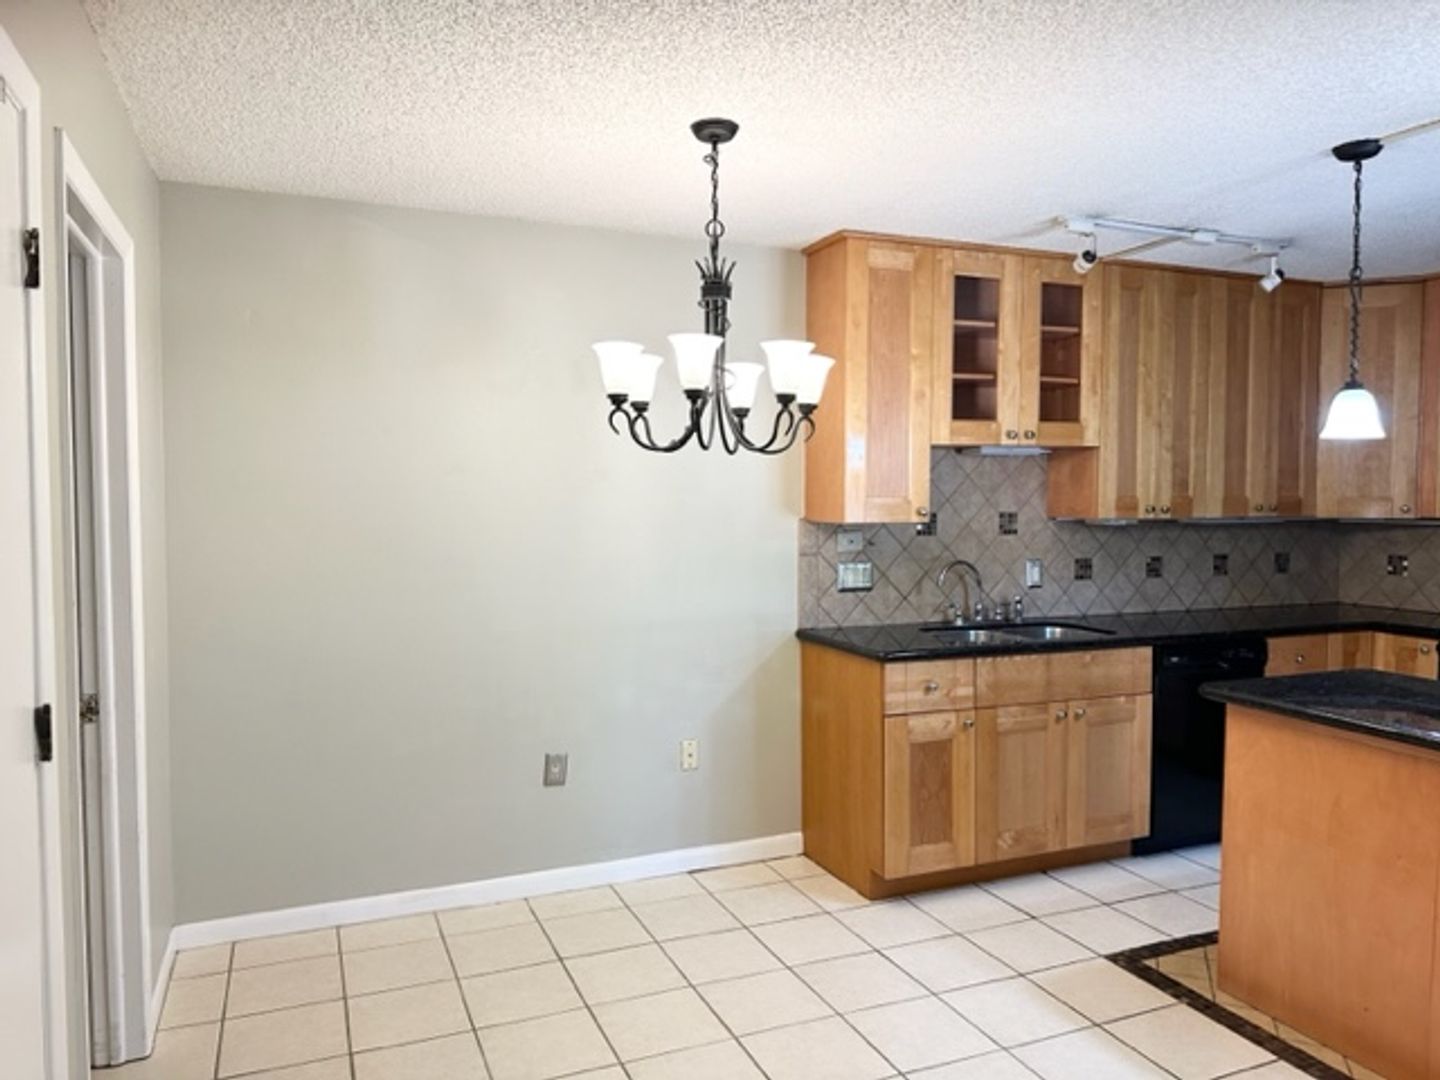 FANTASTIC 3BR/2.5BA TOWNHOME IN PALM HARBOR AVAILABLE 5/4/2024